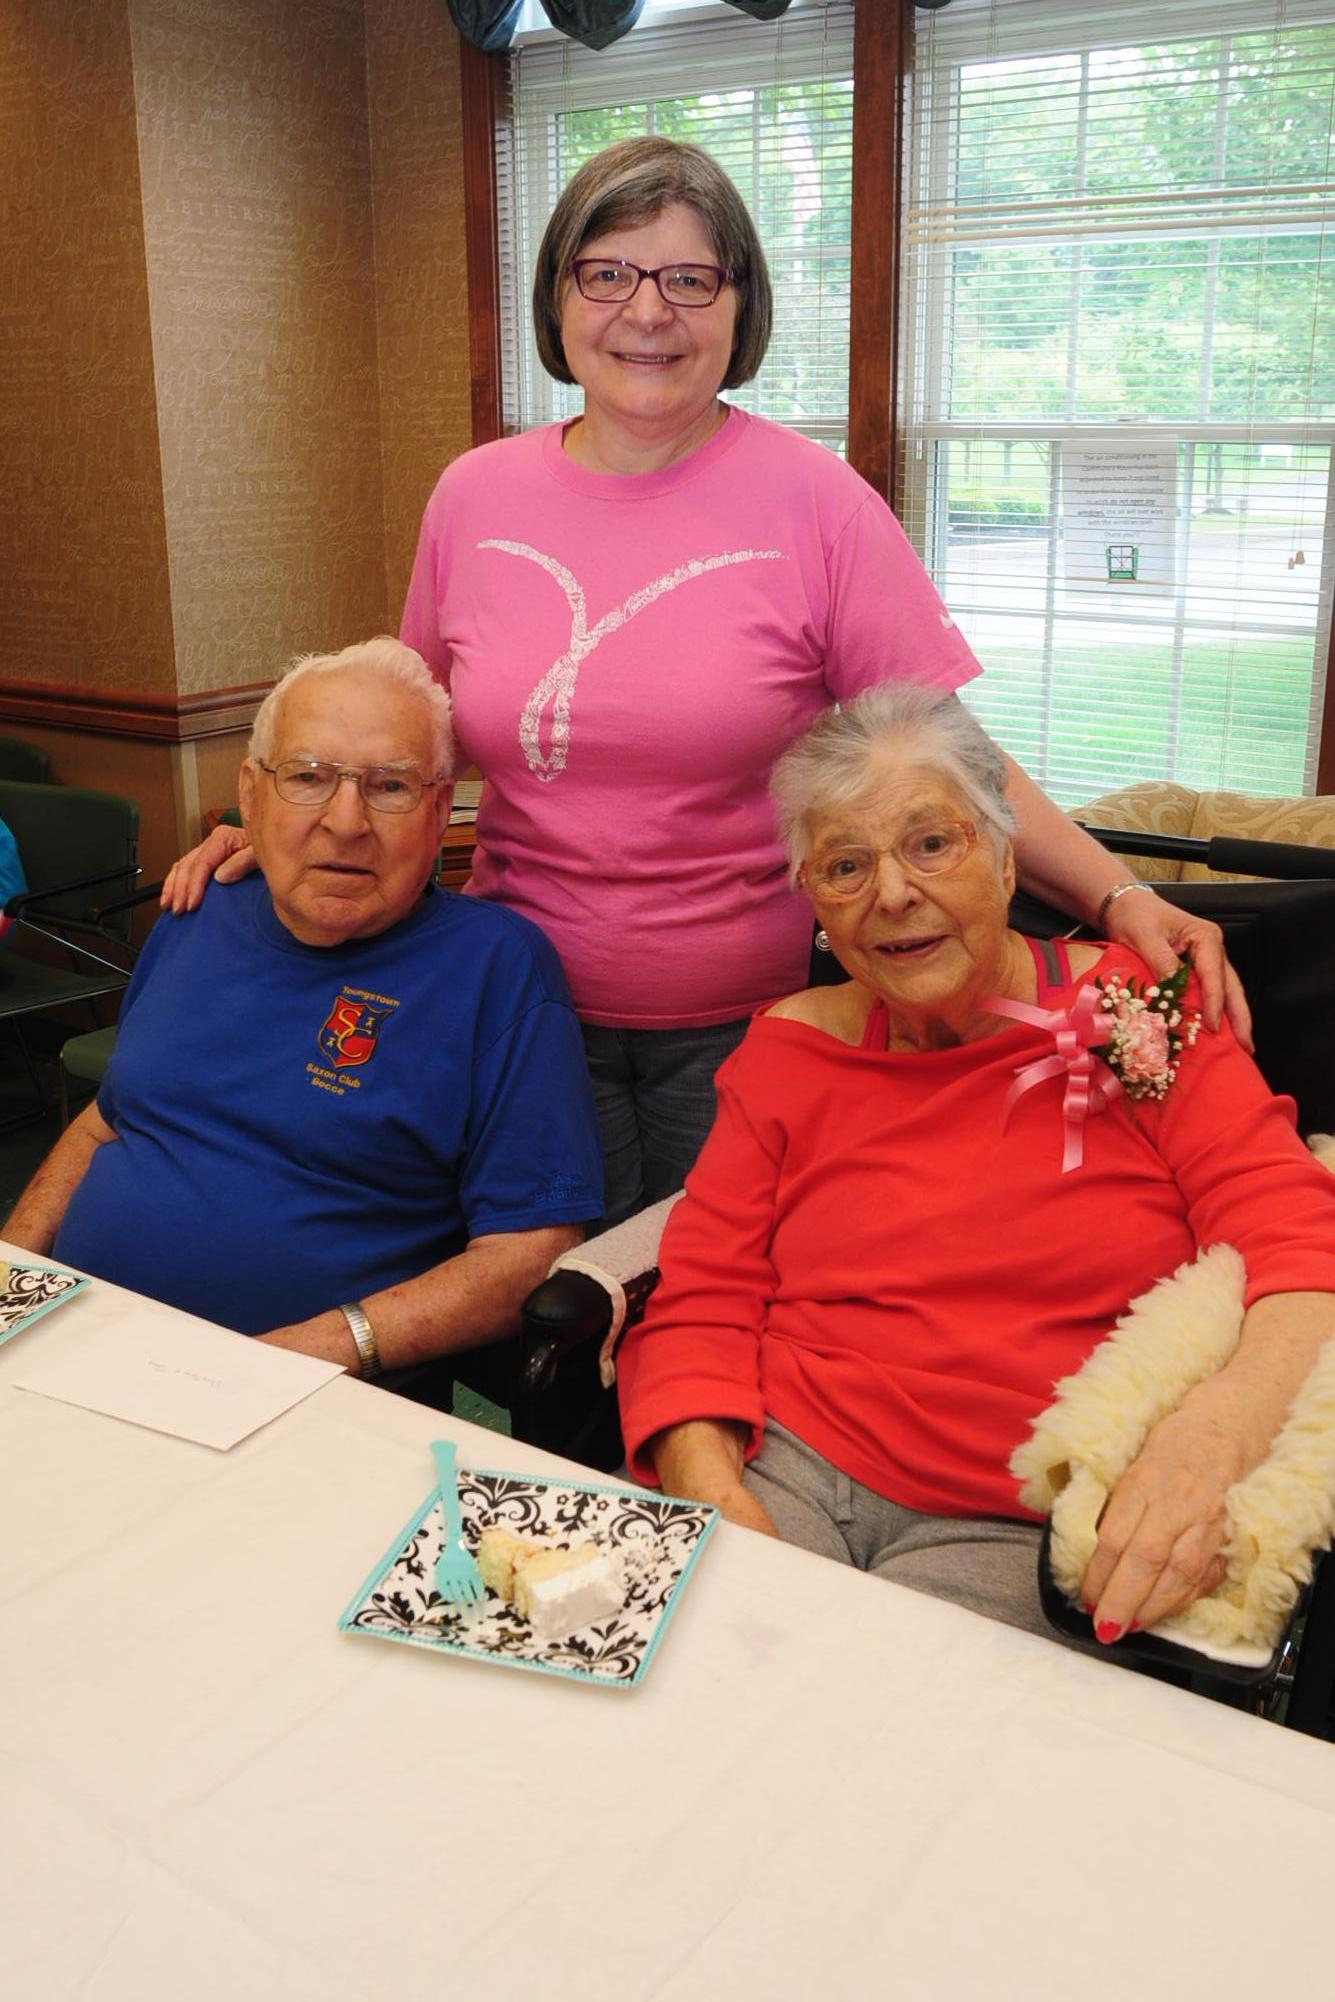 Dorothea and Tom Fizet celebrate their 63rd wedding anniversary with their daughter, Judy Williams of Tacoma, Washington. The couple plans to move to Washington State this month to be near their child